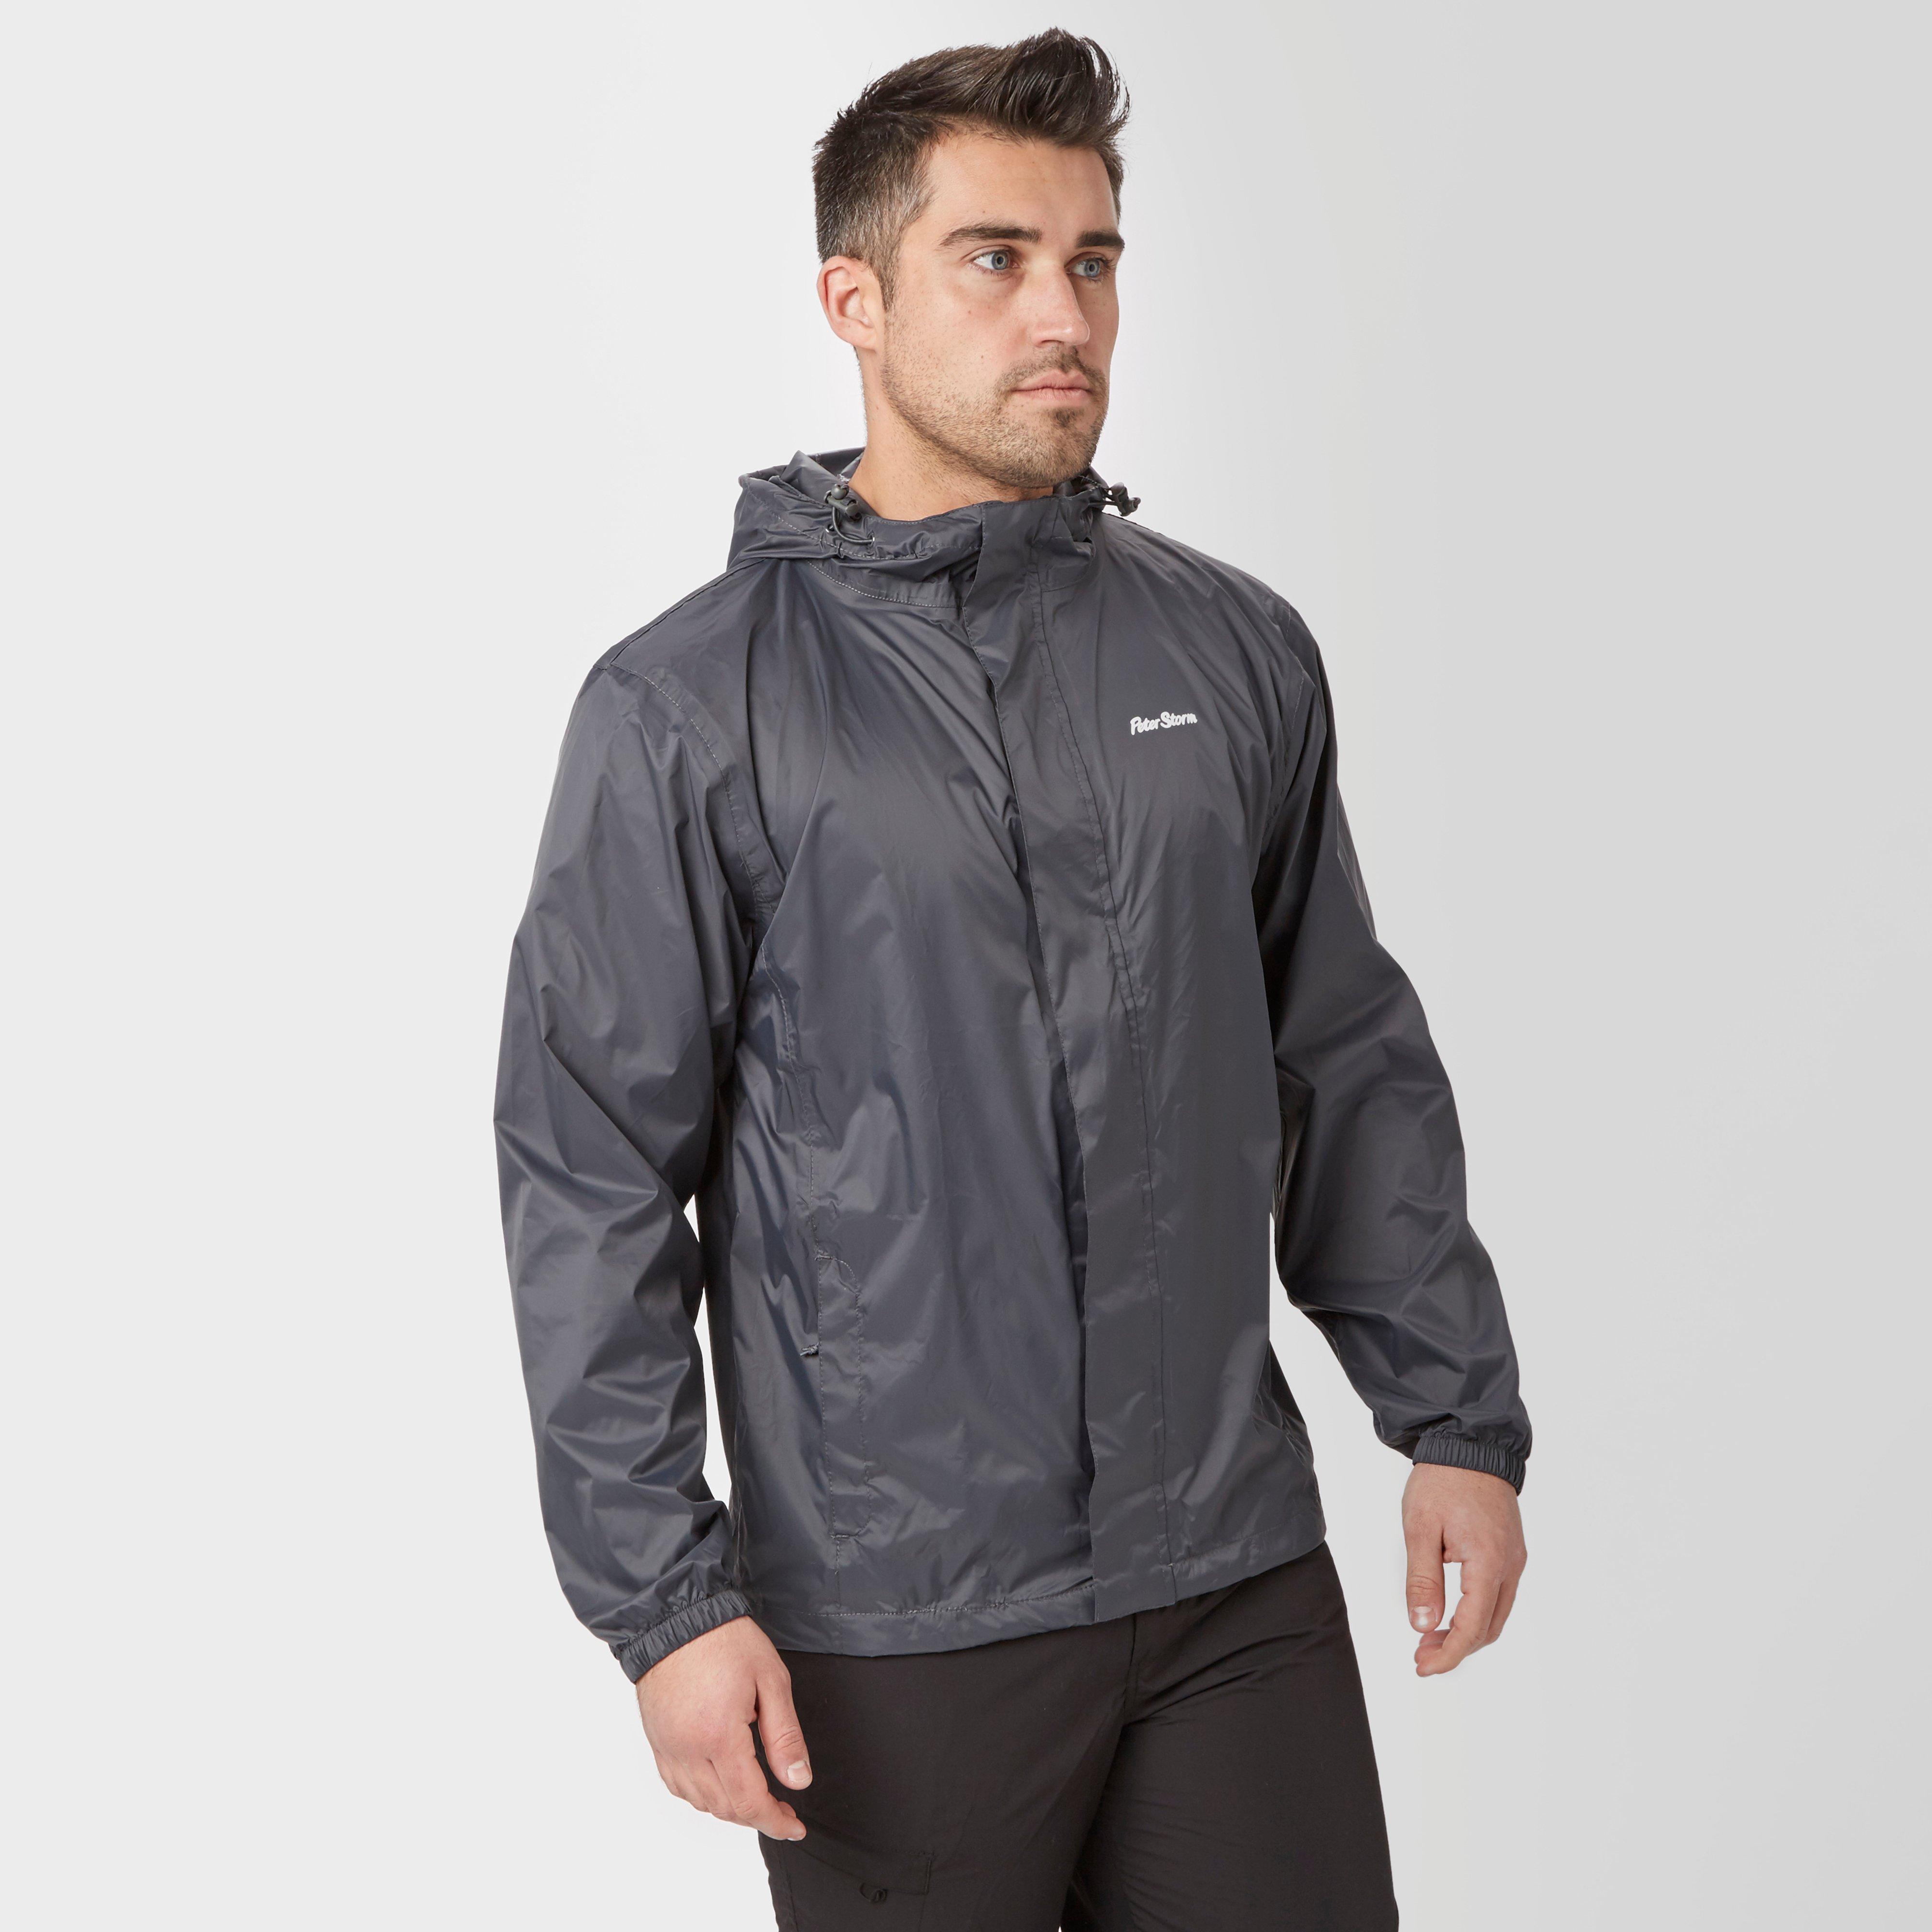 Peter Storm Mens Packable Jacket - Grey/white  Grey/white